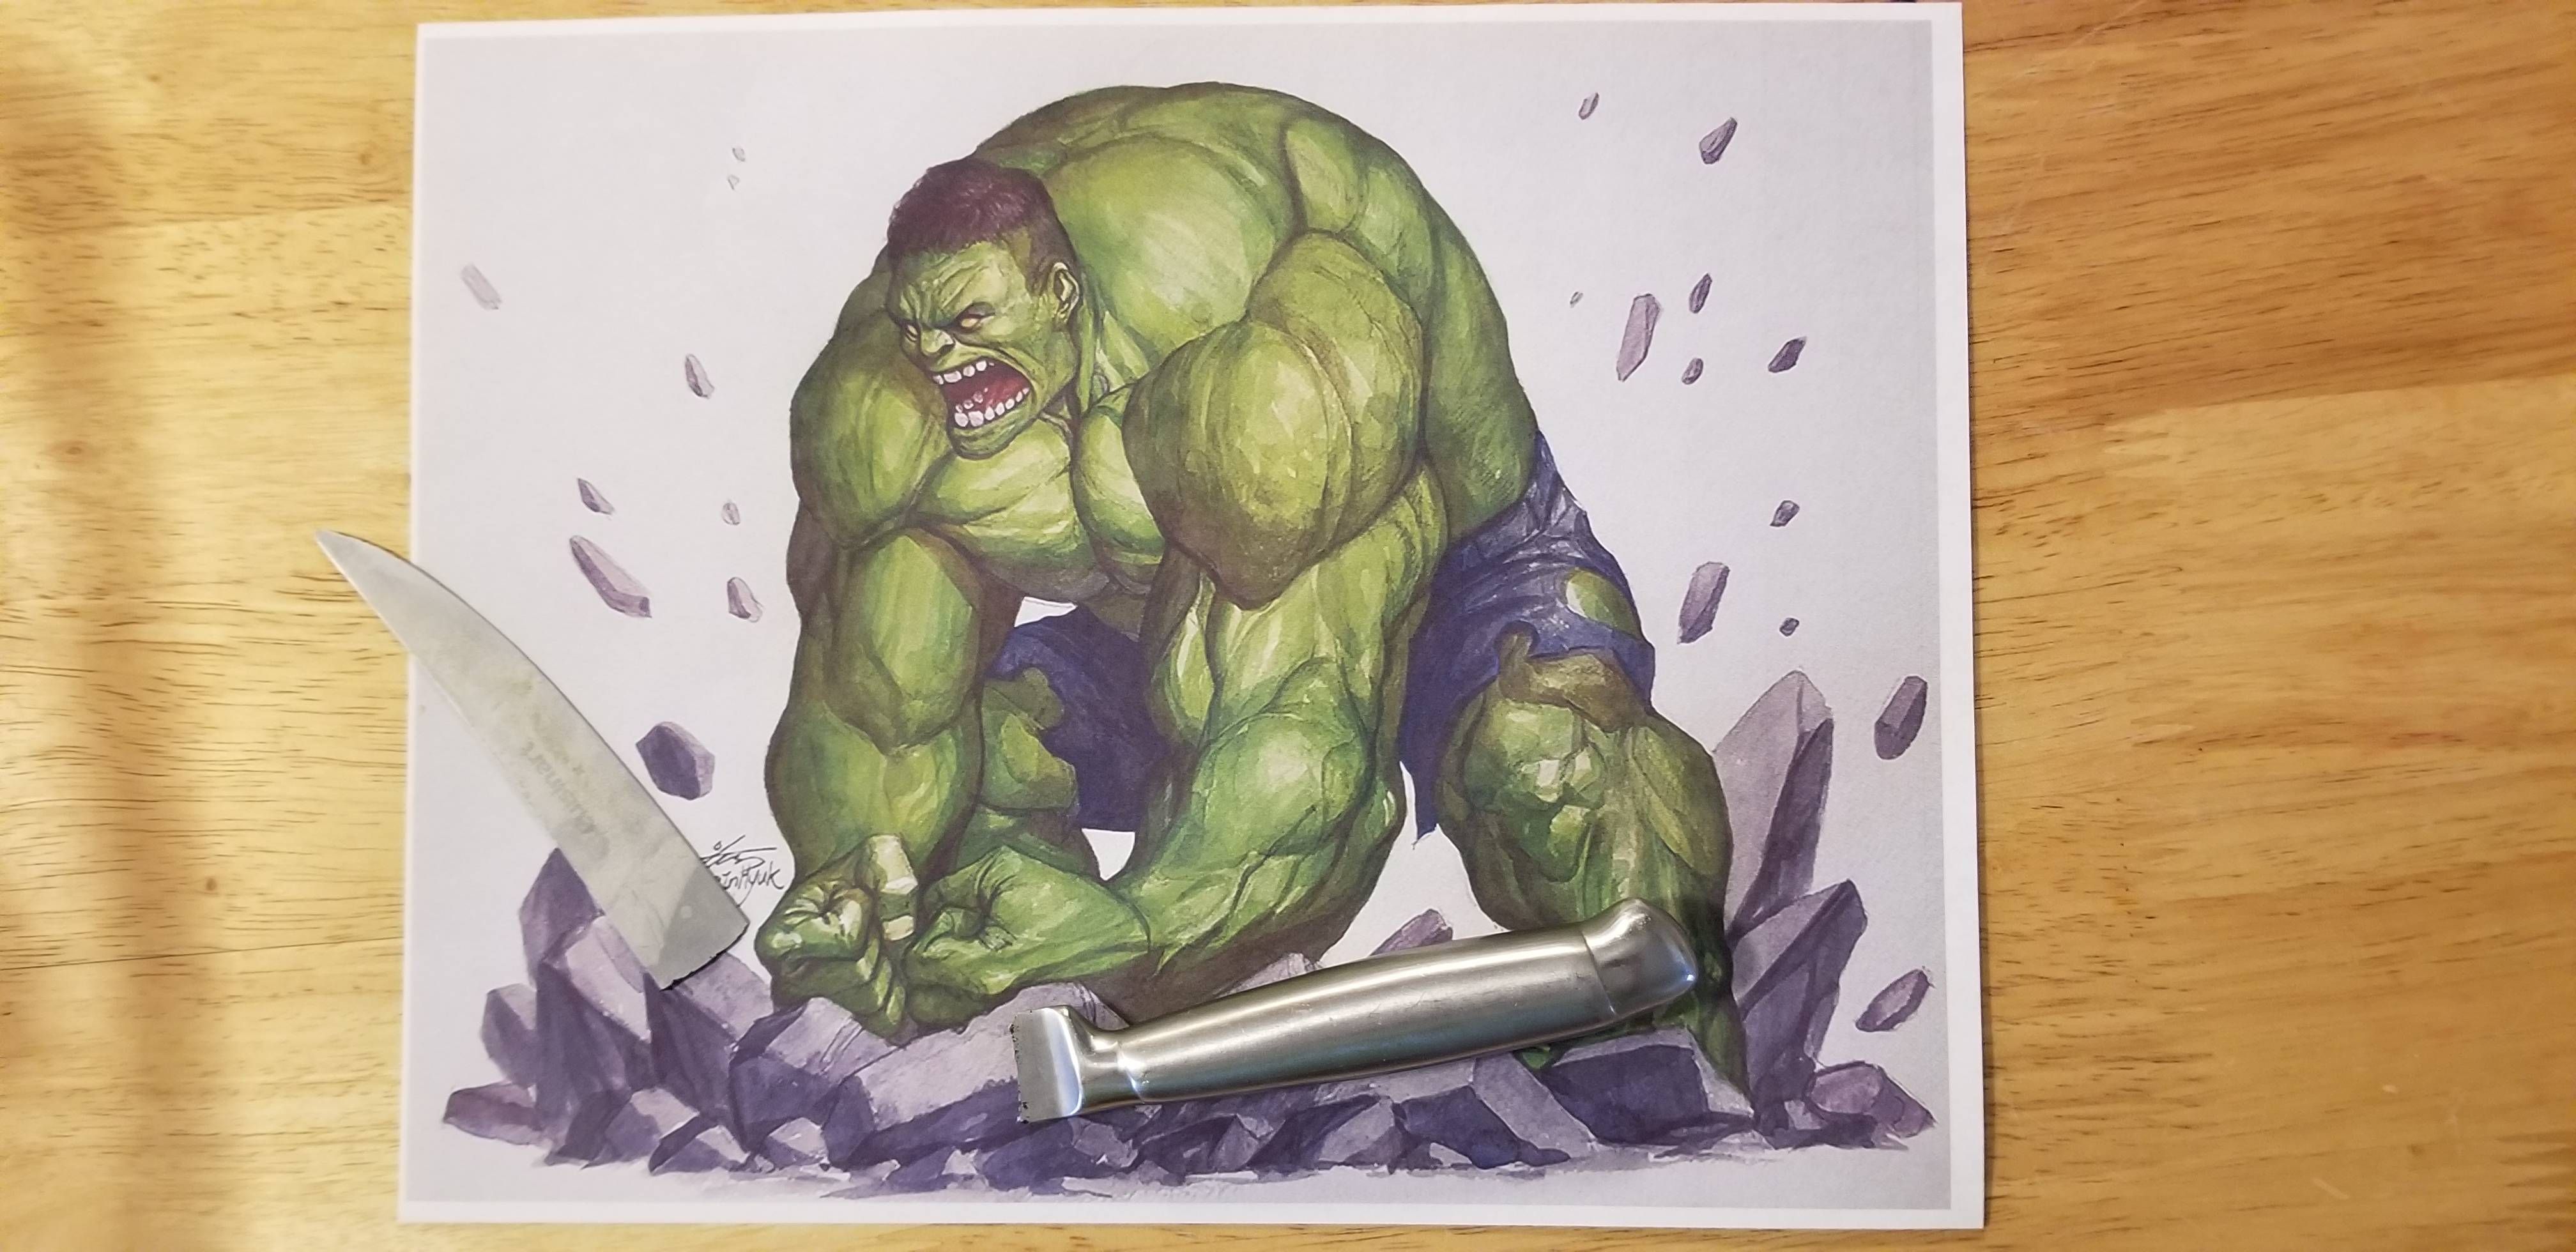 My family calls me Hulk because I have a bad habit of accidentally breaking things by using too much force. I left this on the kitchen island today, in shame.